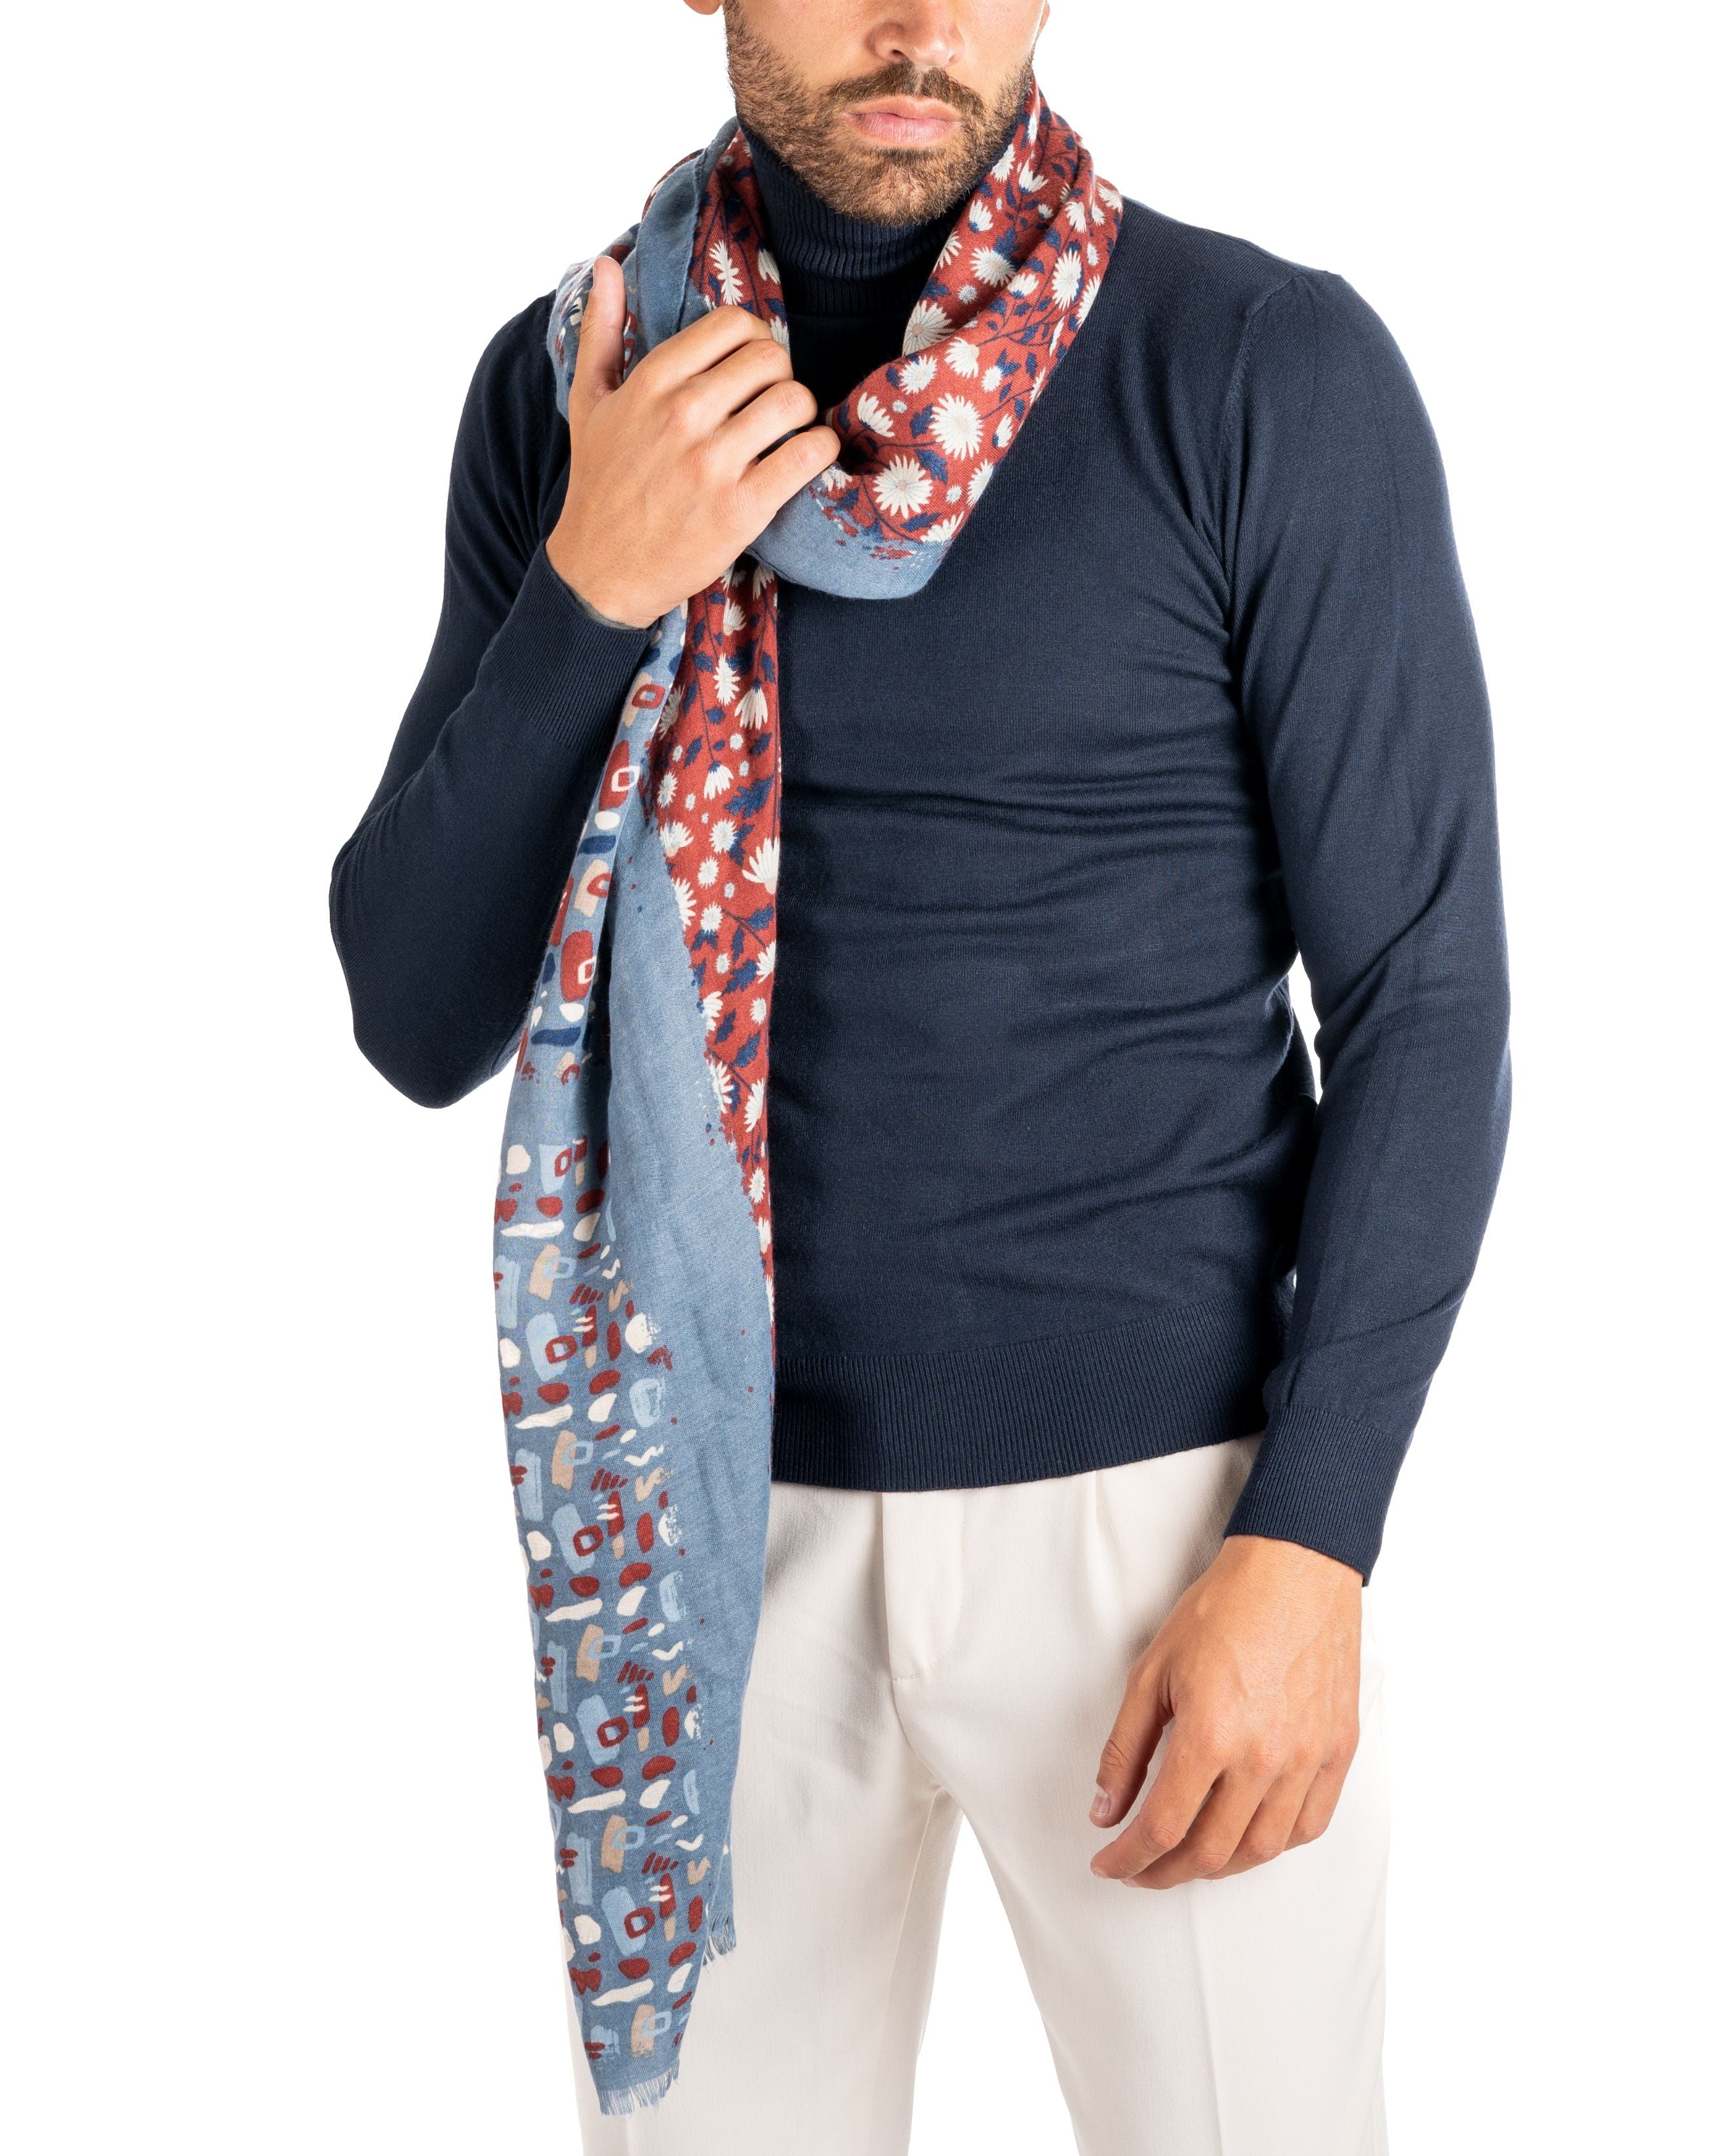 BORDEAUX SCARF WITH LIGHT BLUE FLORAL PATTERN